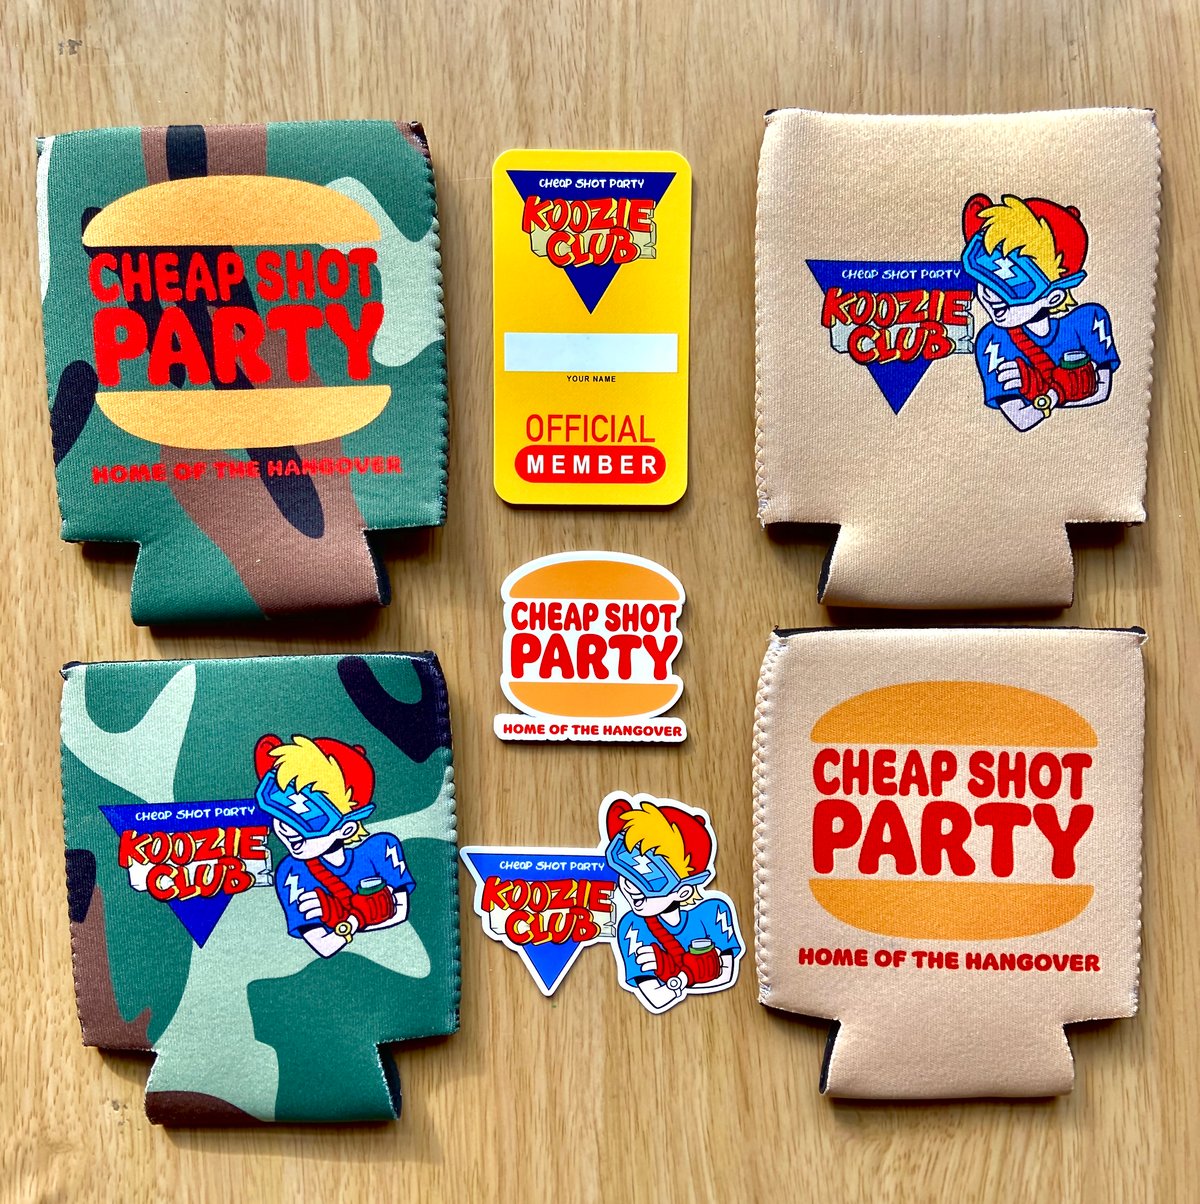 Image of "Home of the Hangover" Koozie (Cheap Shot Party Koozie Club 2020 Release #3)